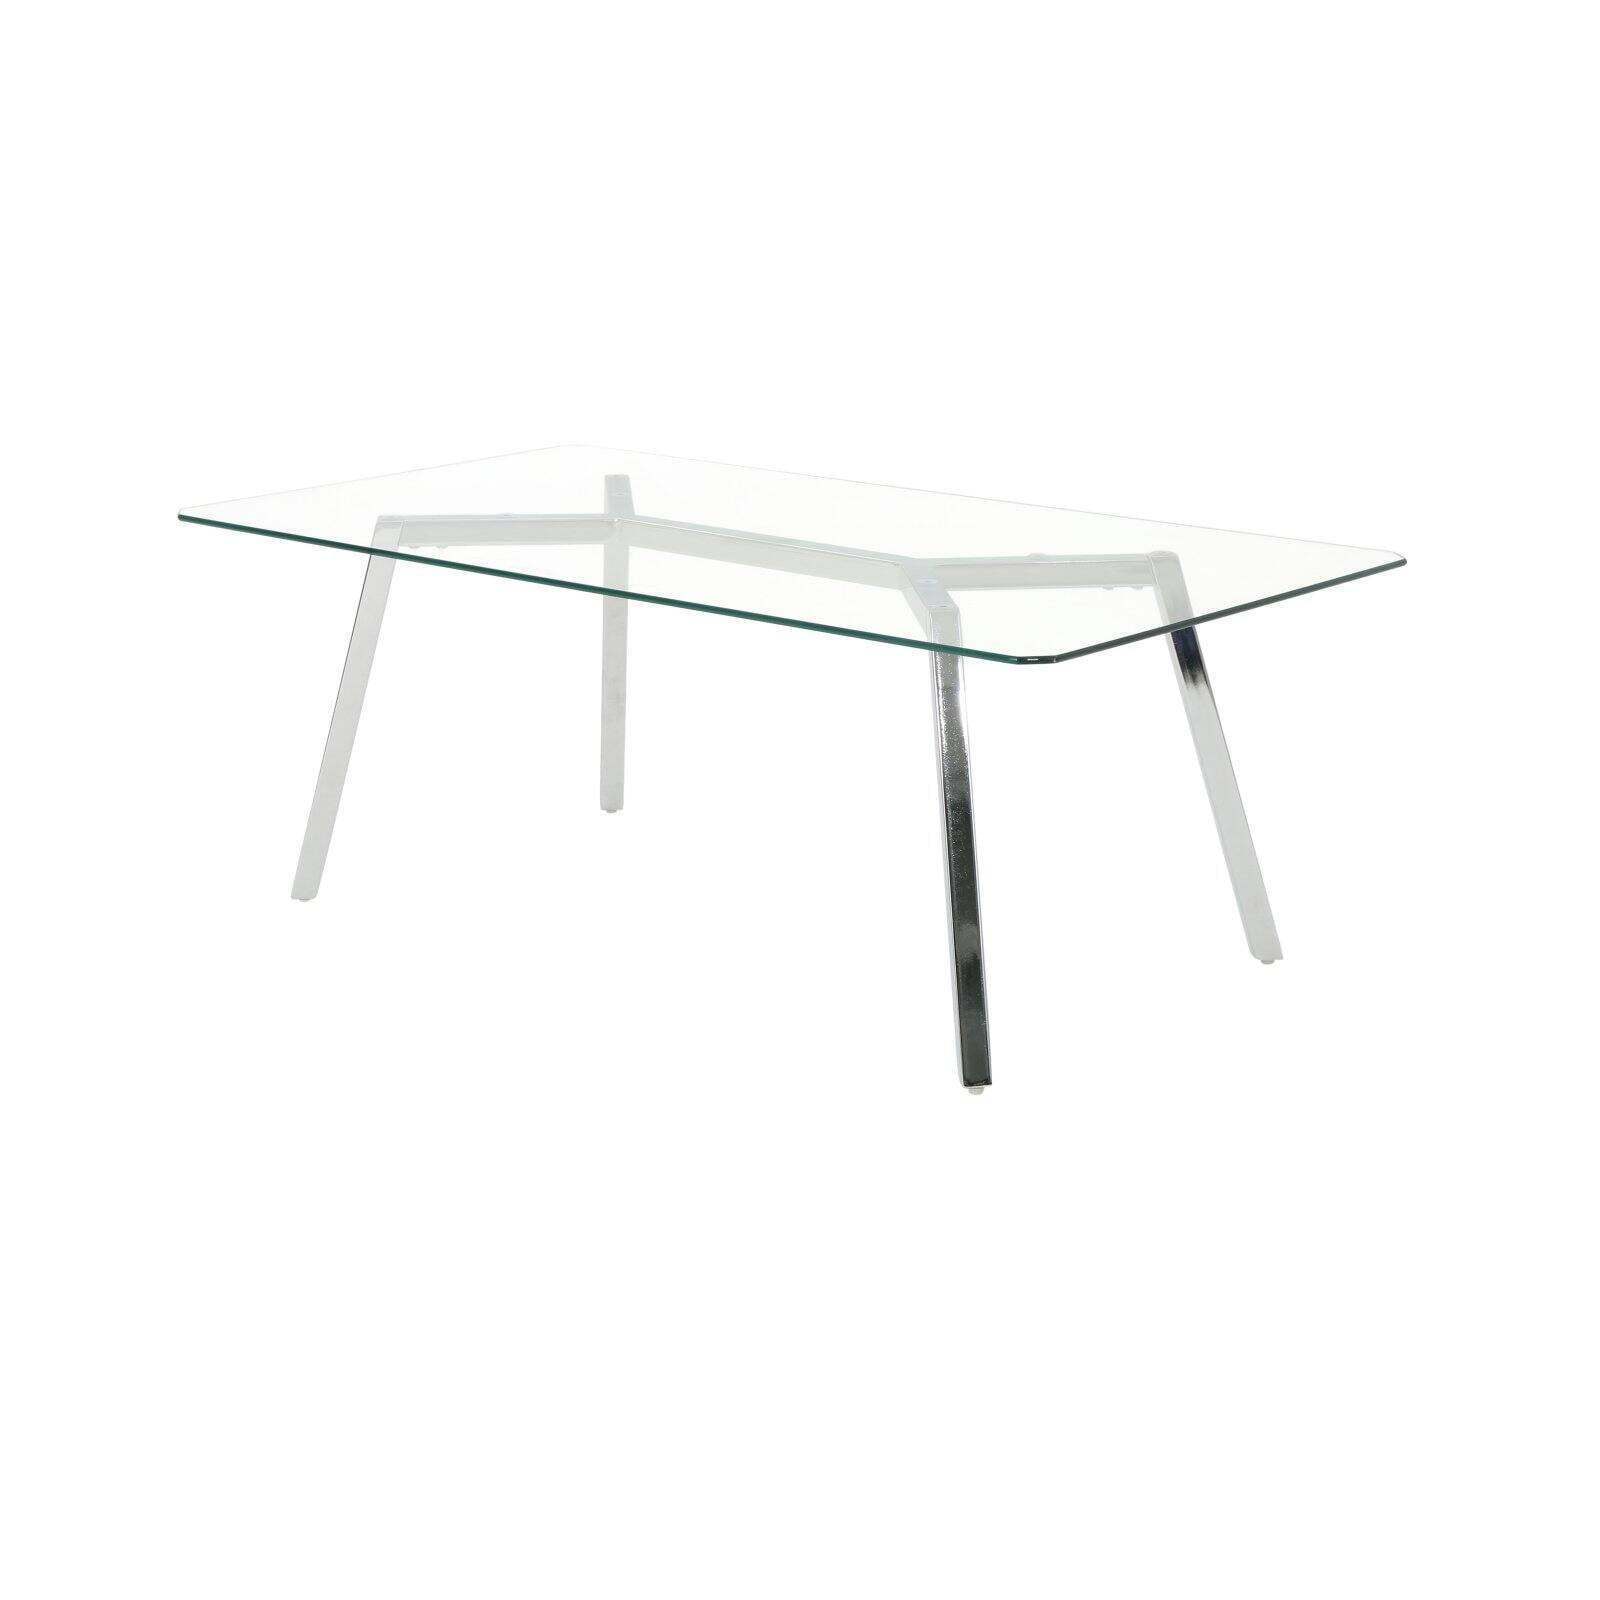 Zavier Rectangular Glass Top Dining, How To Make Glass Top Table